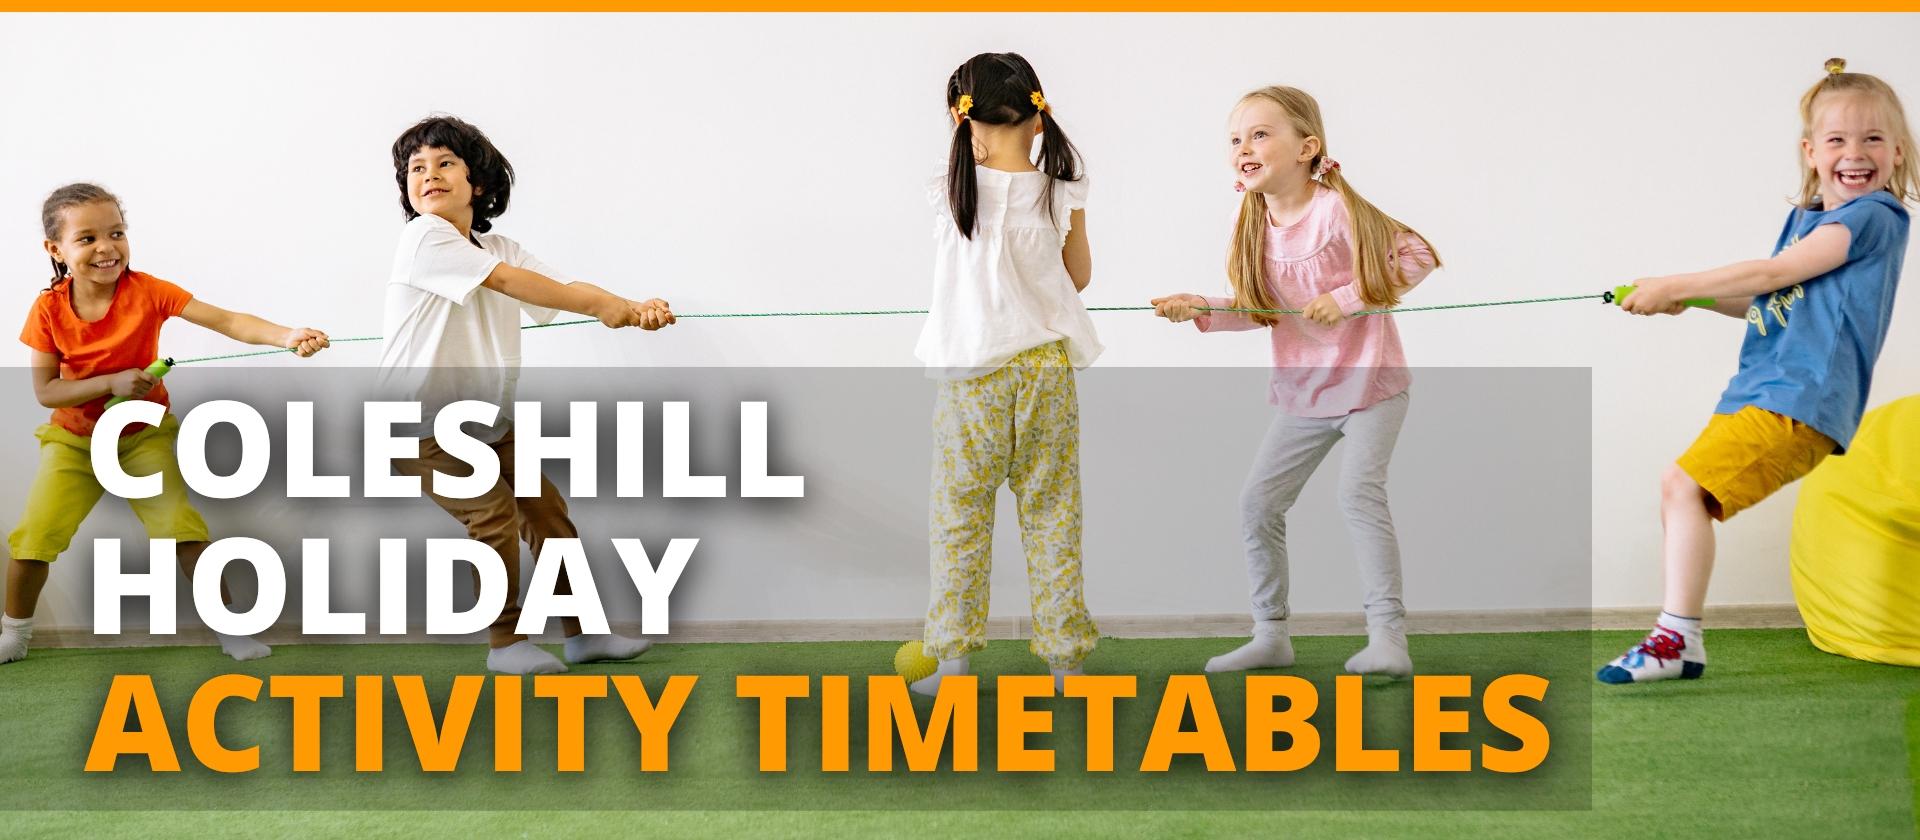 North Warwickshire leisure, Coleshill childrens holiday activity timetables